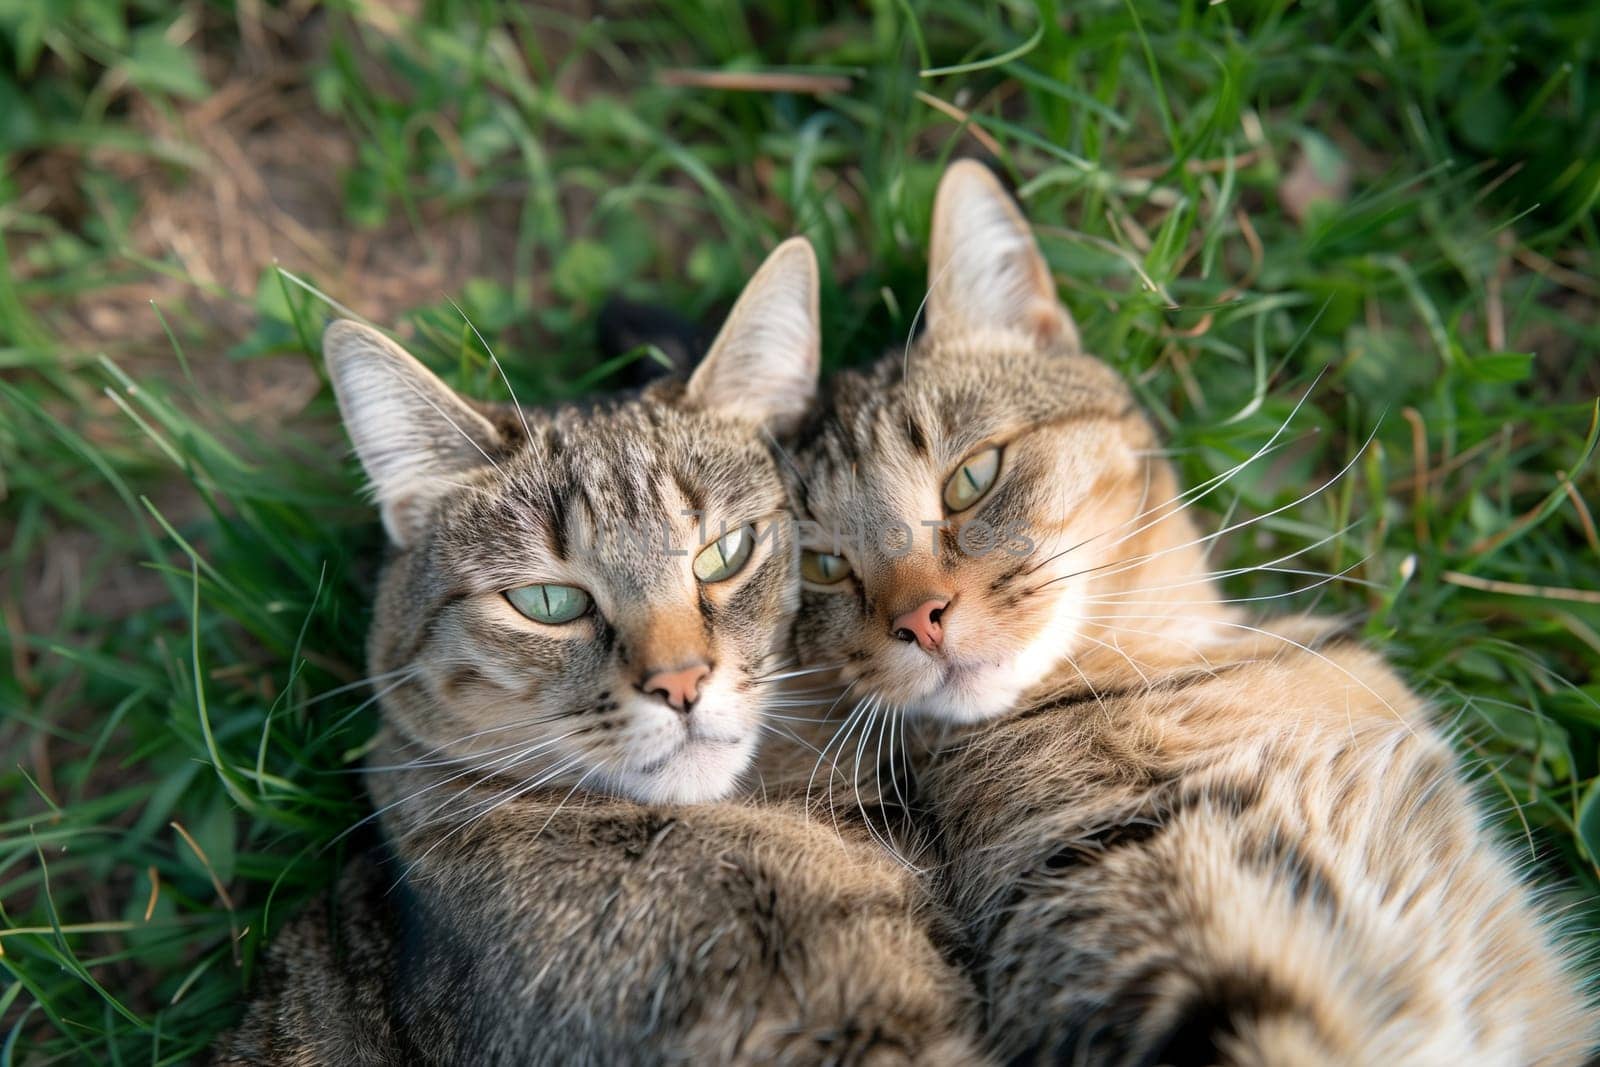 A pair of cuddling cats looks into the camera, capturing a cozy moment on a bed of greenery.